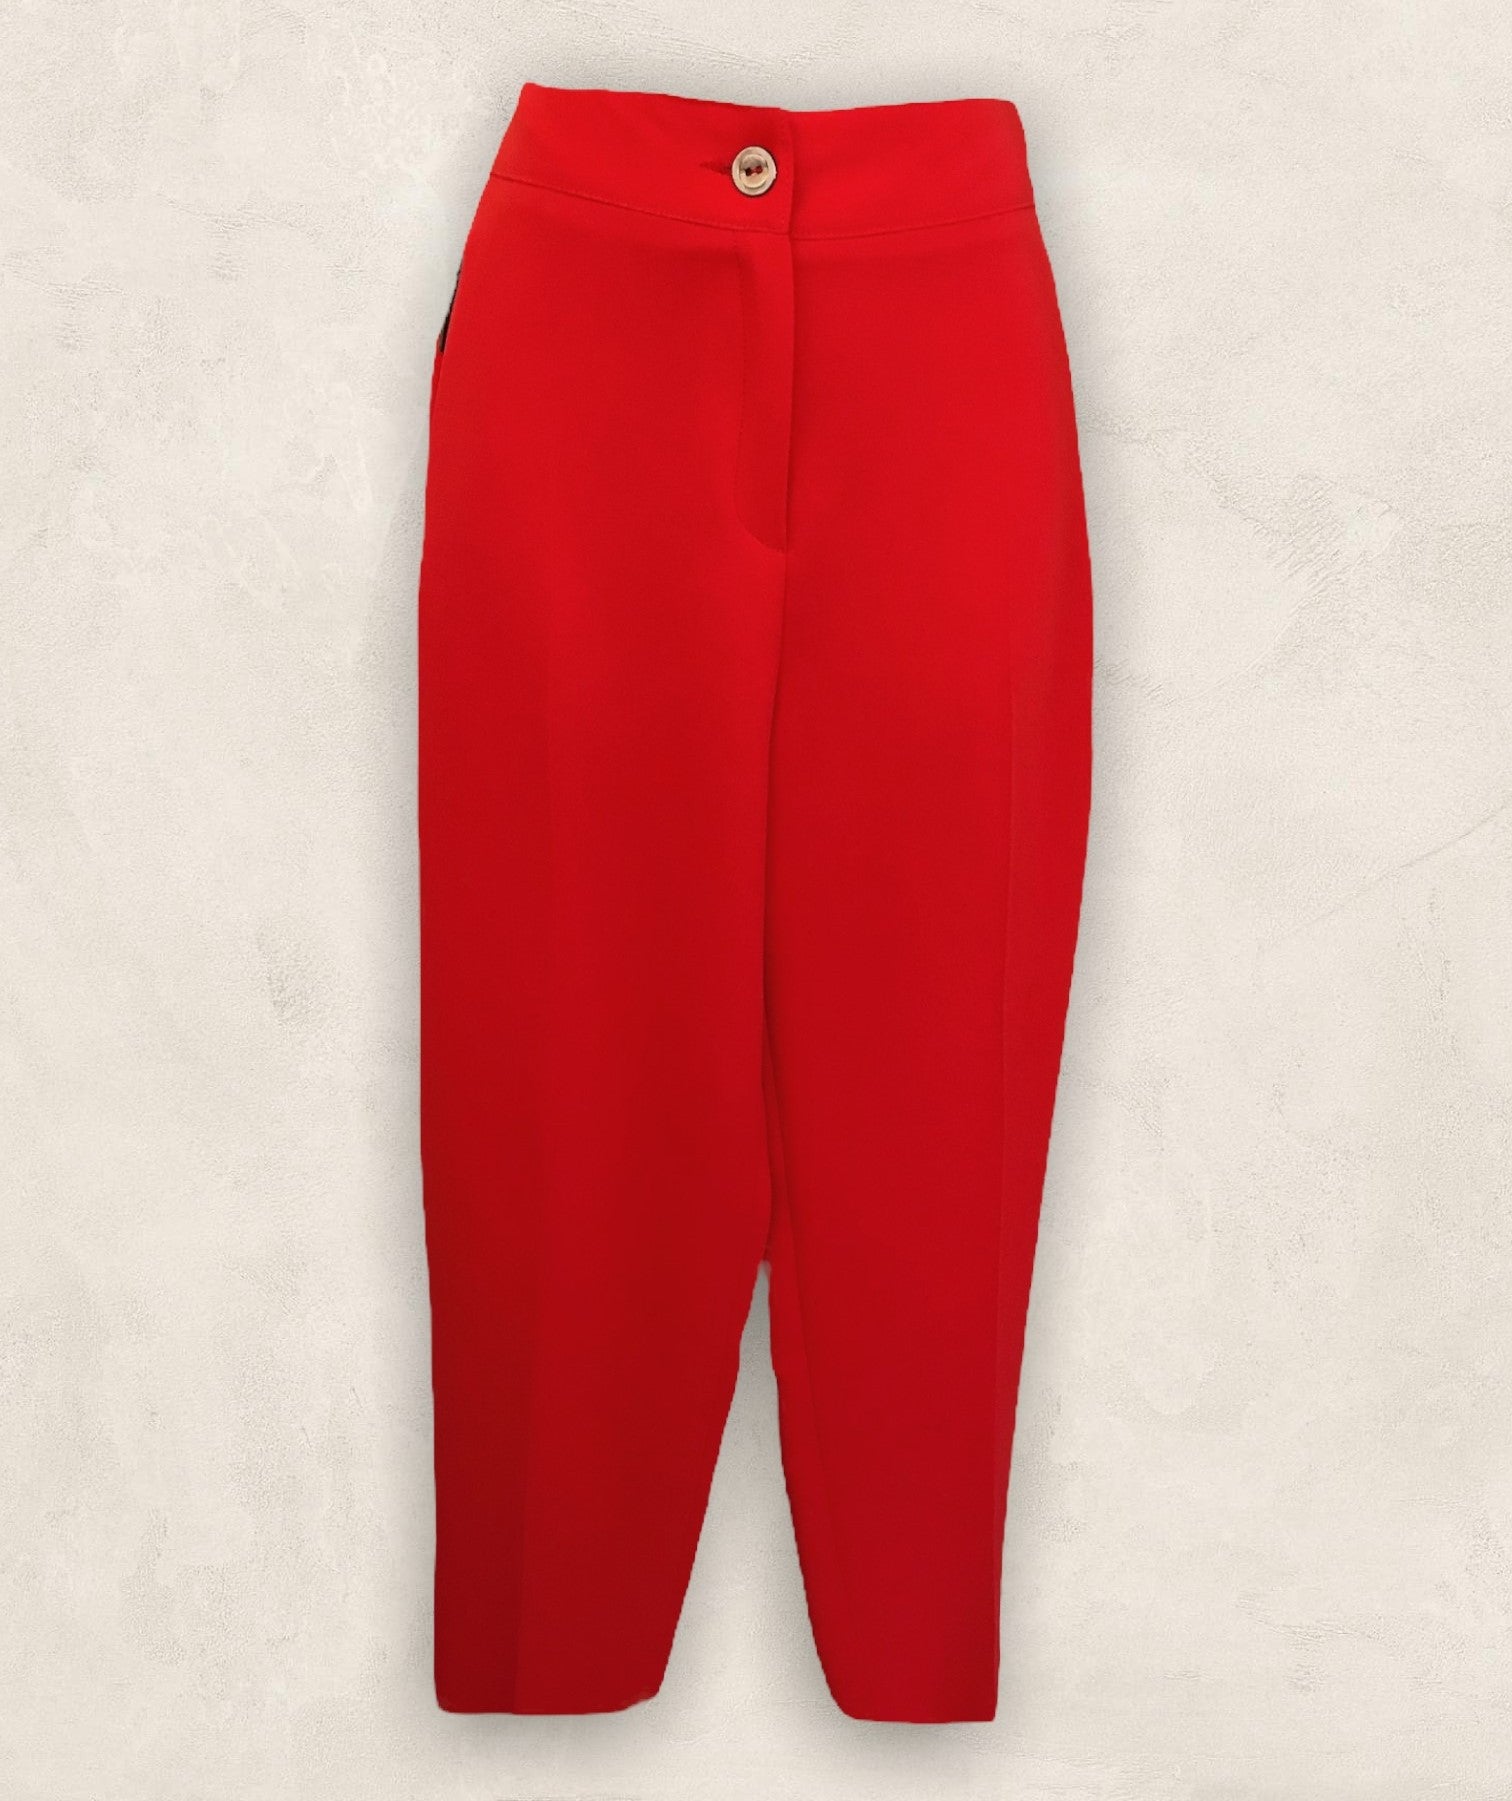 Marie Mero Red Berry Crepe Tapered Trousers UK 16 EU 44 US 12 BNWT Timeless Fashions